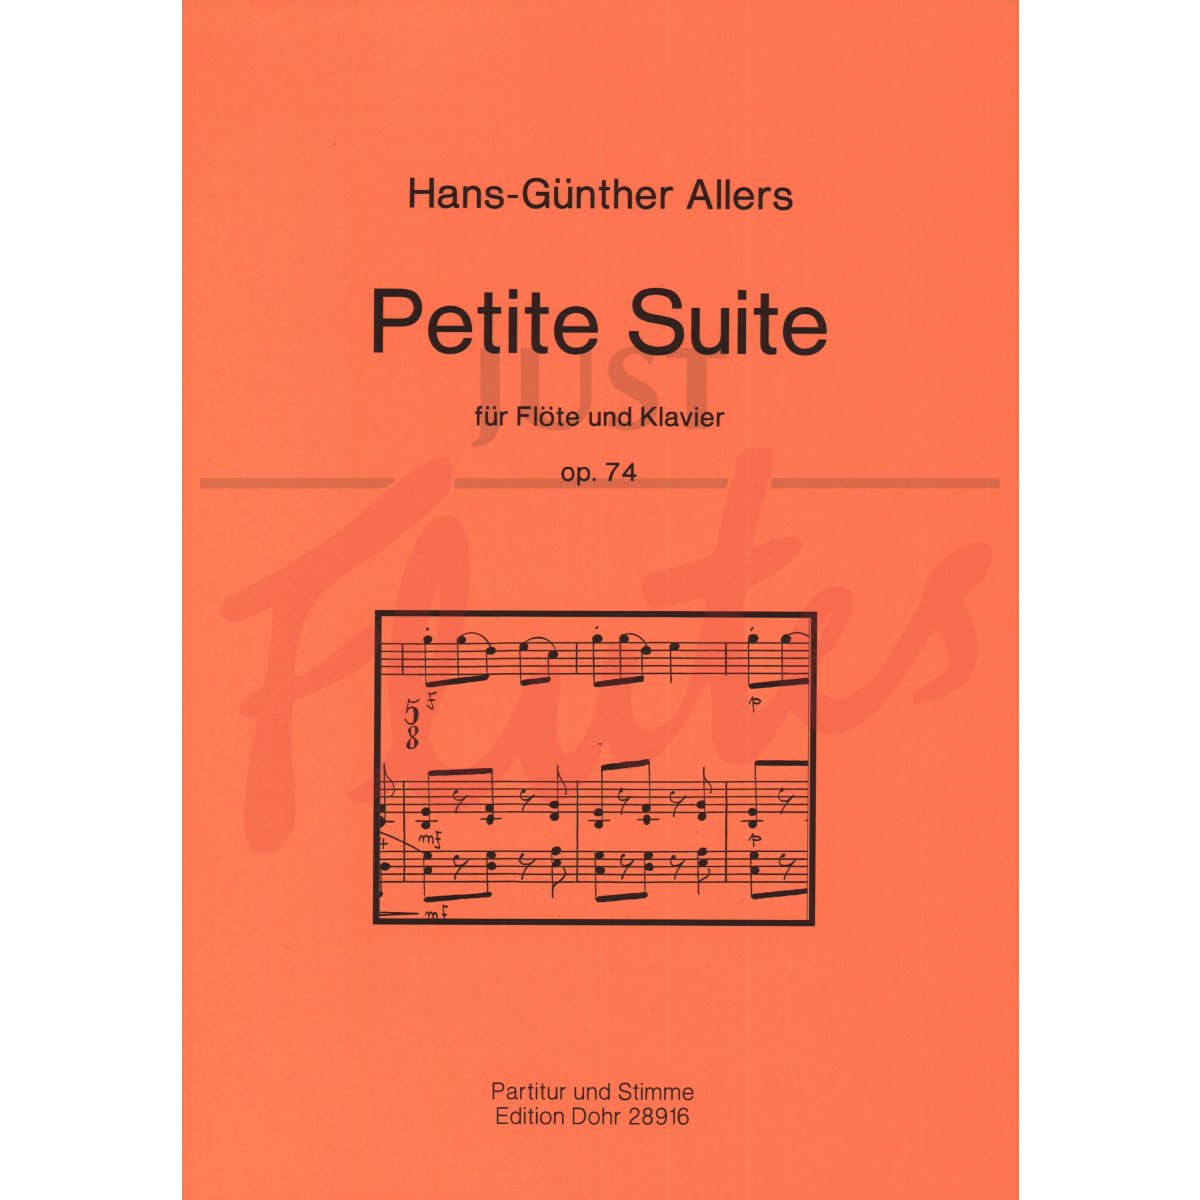 Petite Suite for Flute and Piano